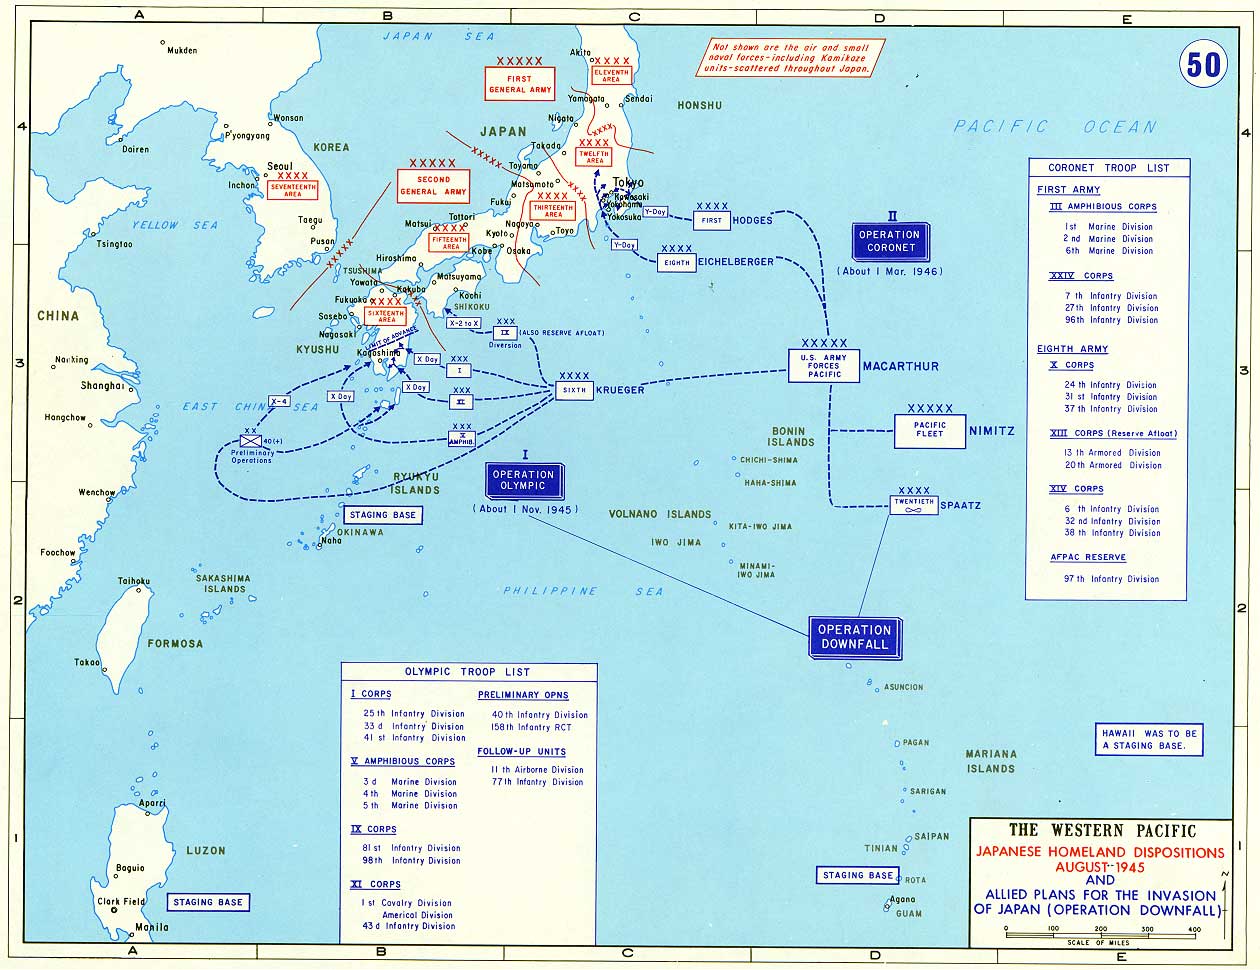 Allied Plans for the Invasion of Japan, August 1945